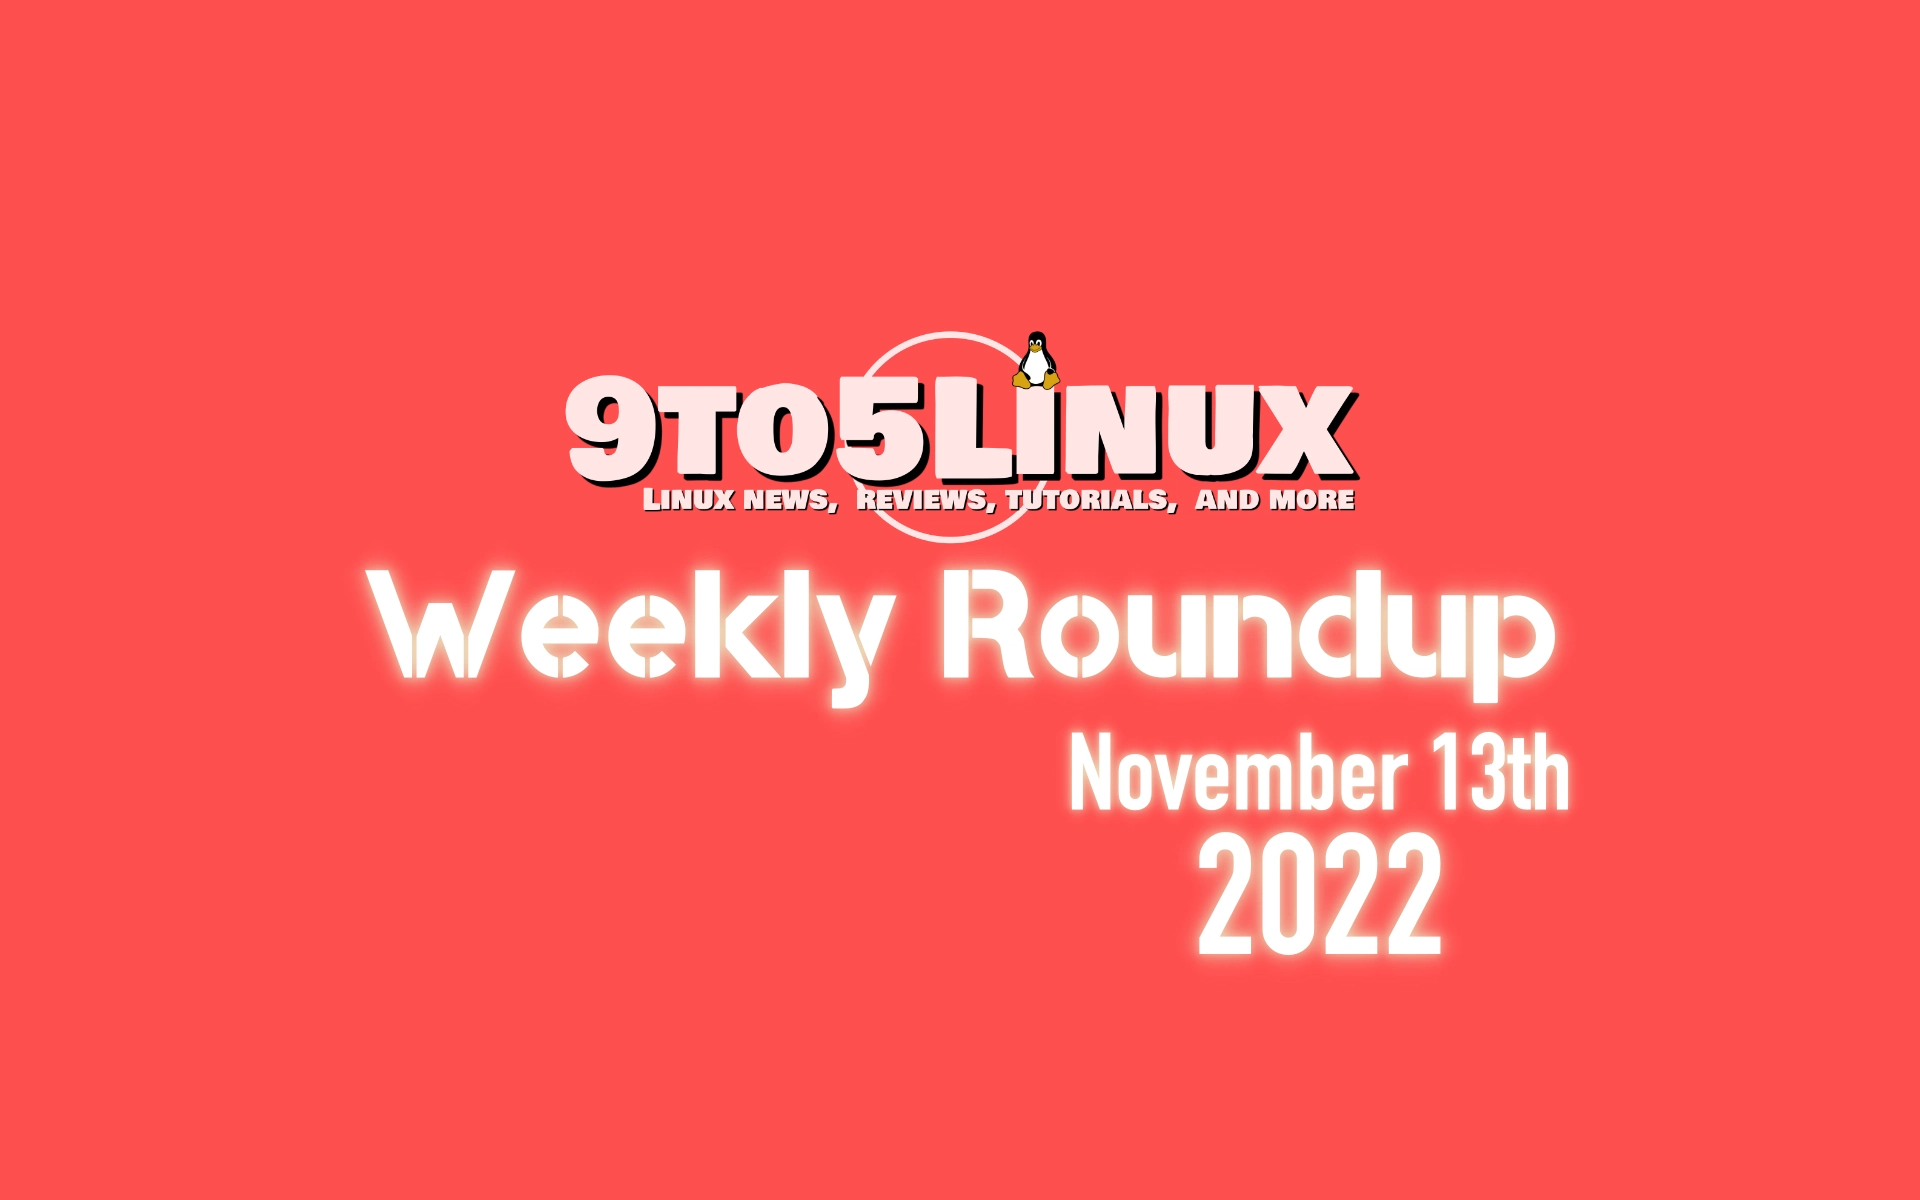 9to5Linux Weekly Roundup: November 13th, 2022